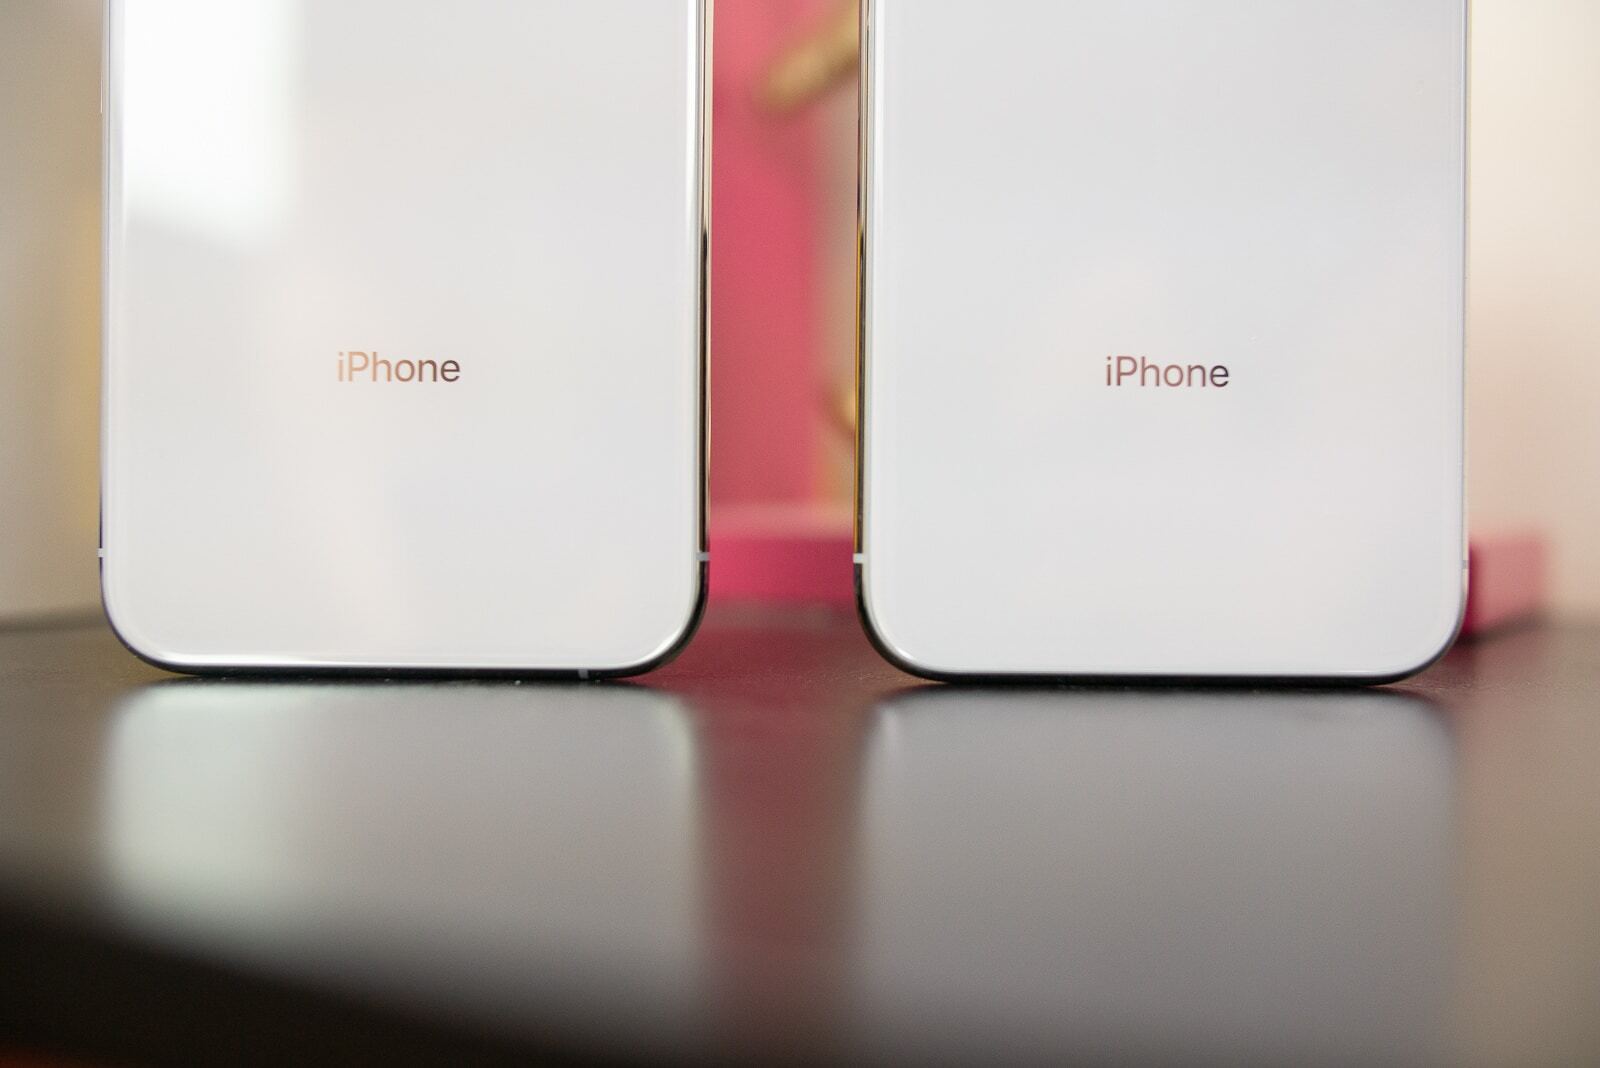 Apple's 2020 iPhone 12 series will adopt rear Time-of-Flight cameras: Kuo